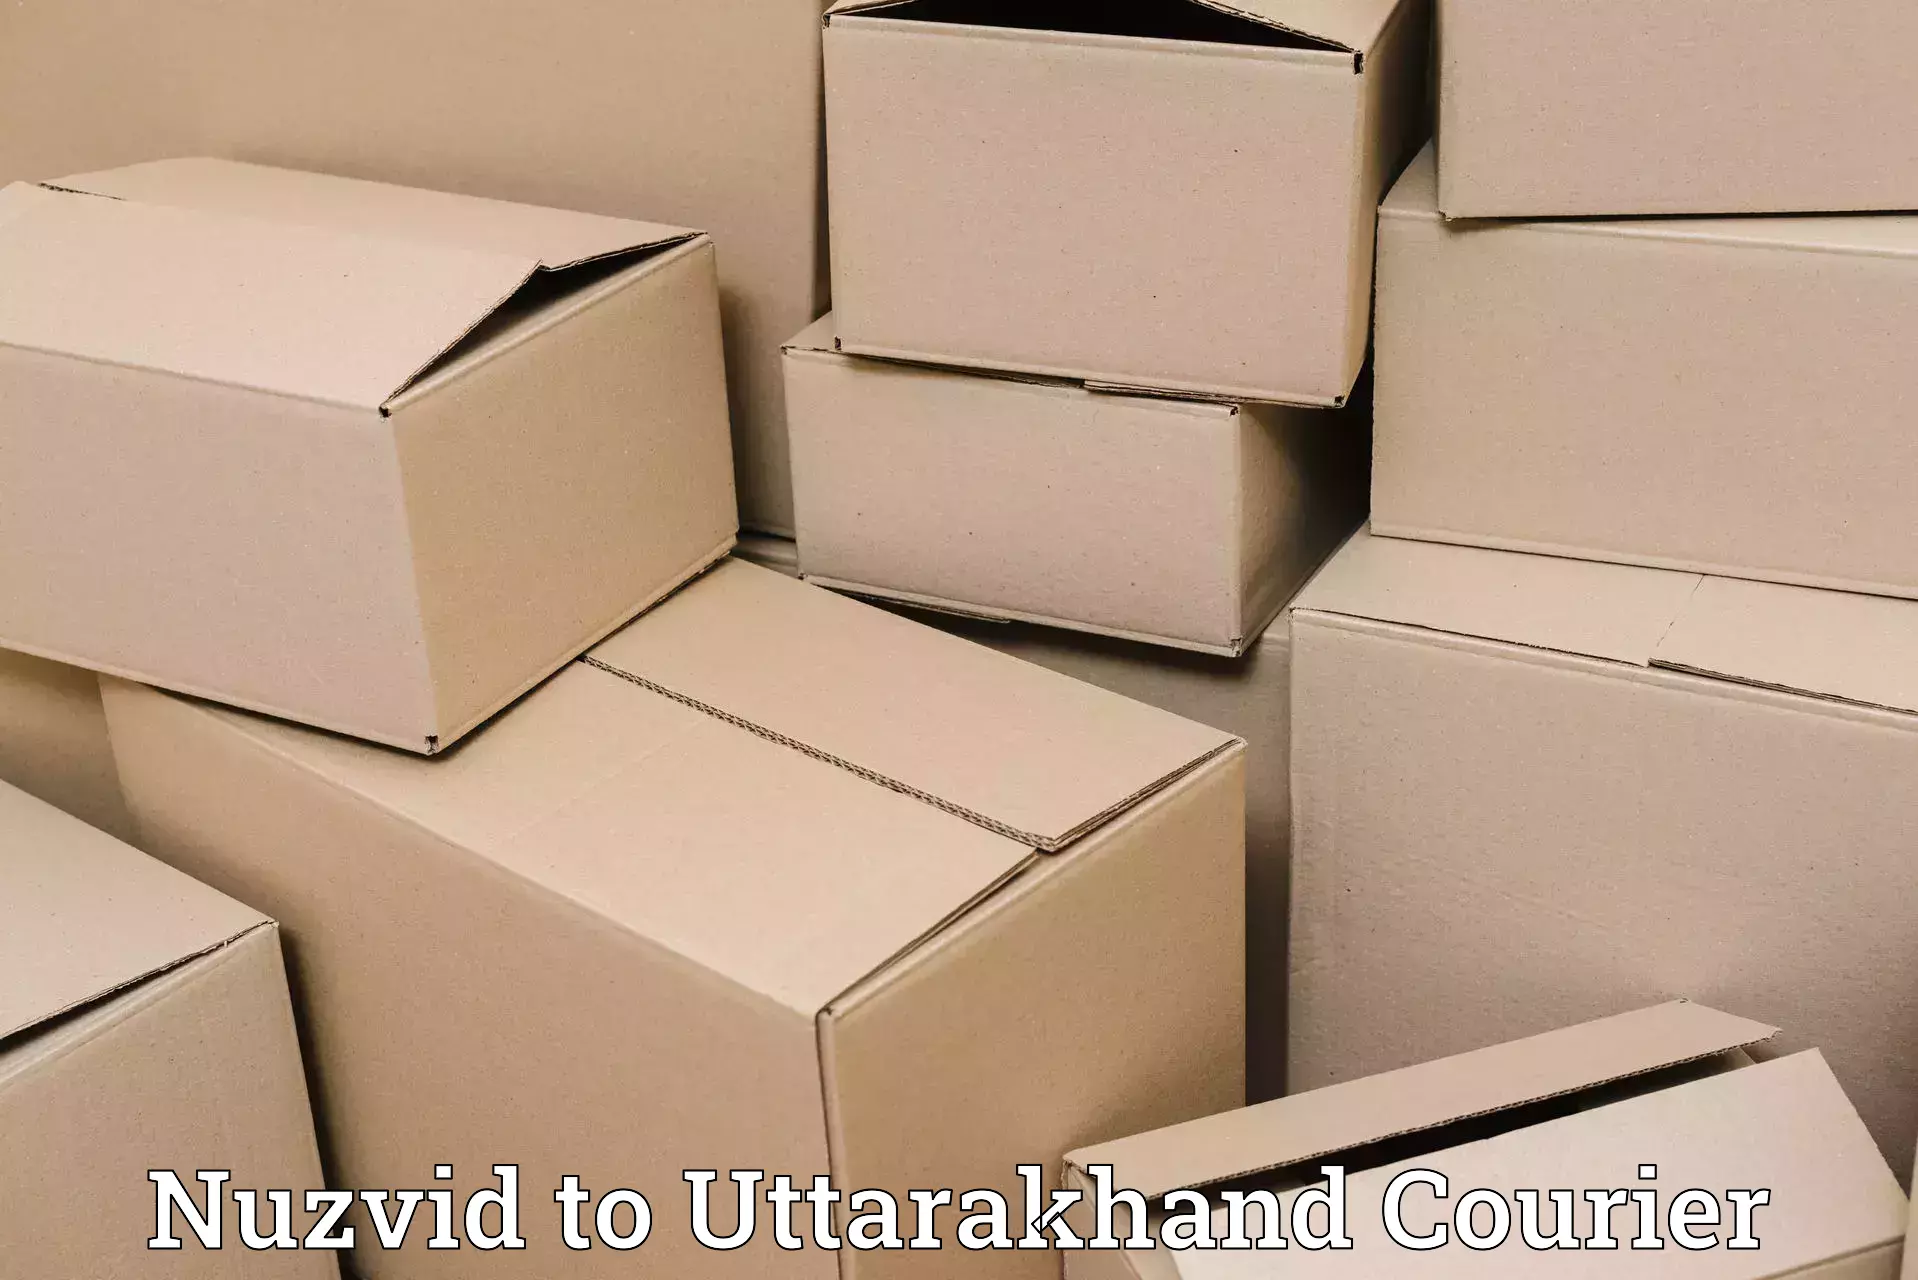 Affordable international shipping in Nuzvid to Rudrapur